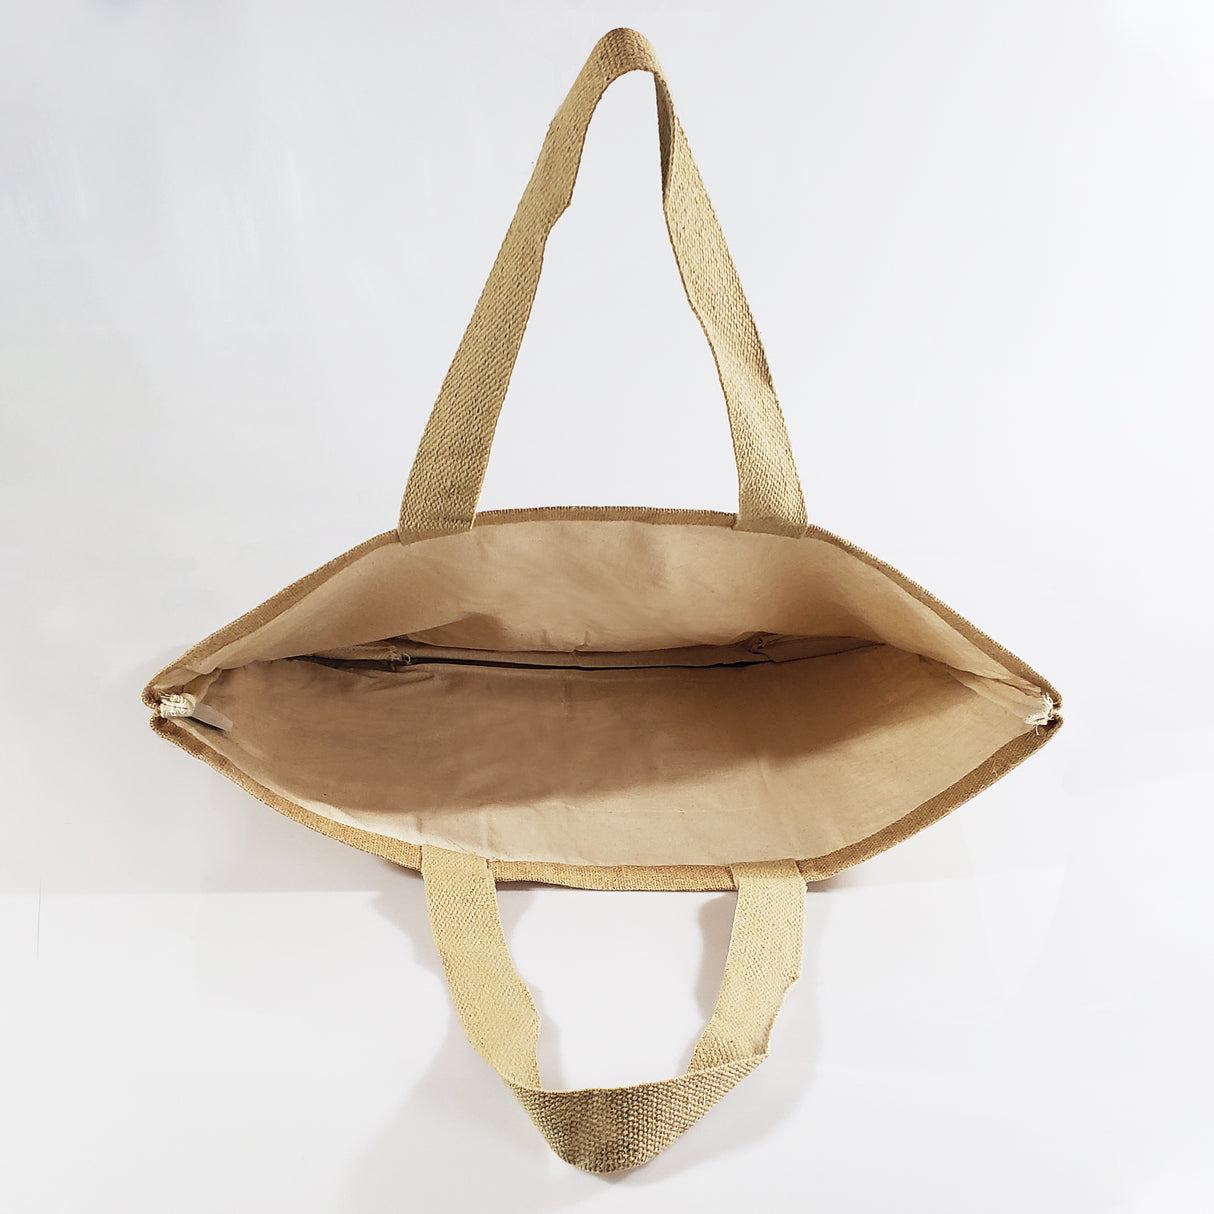 Everyday Jute Bags / Carry-All Burlap Totes TJ895